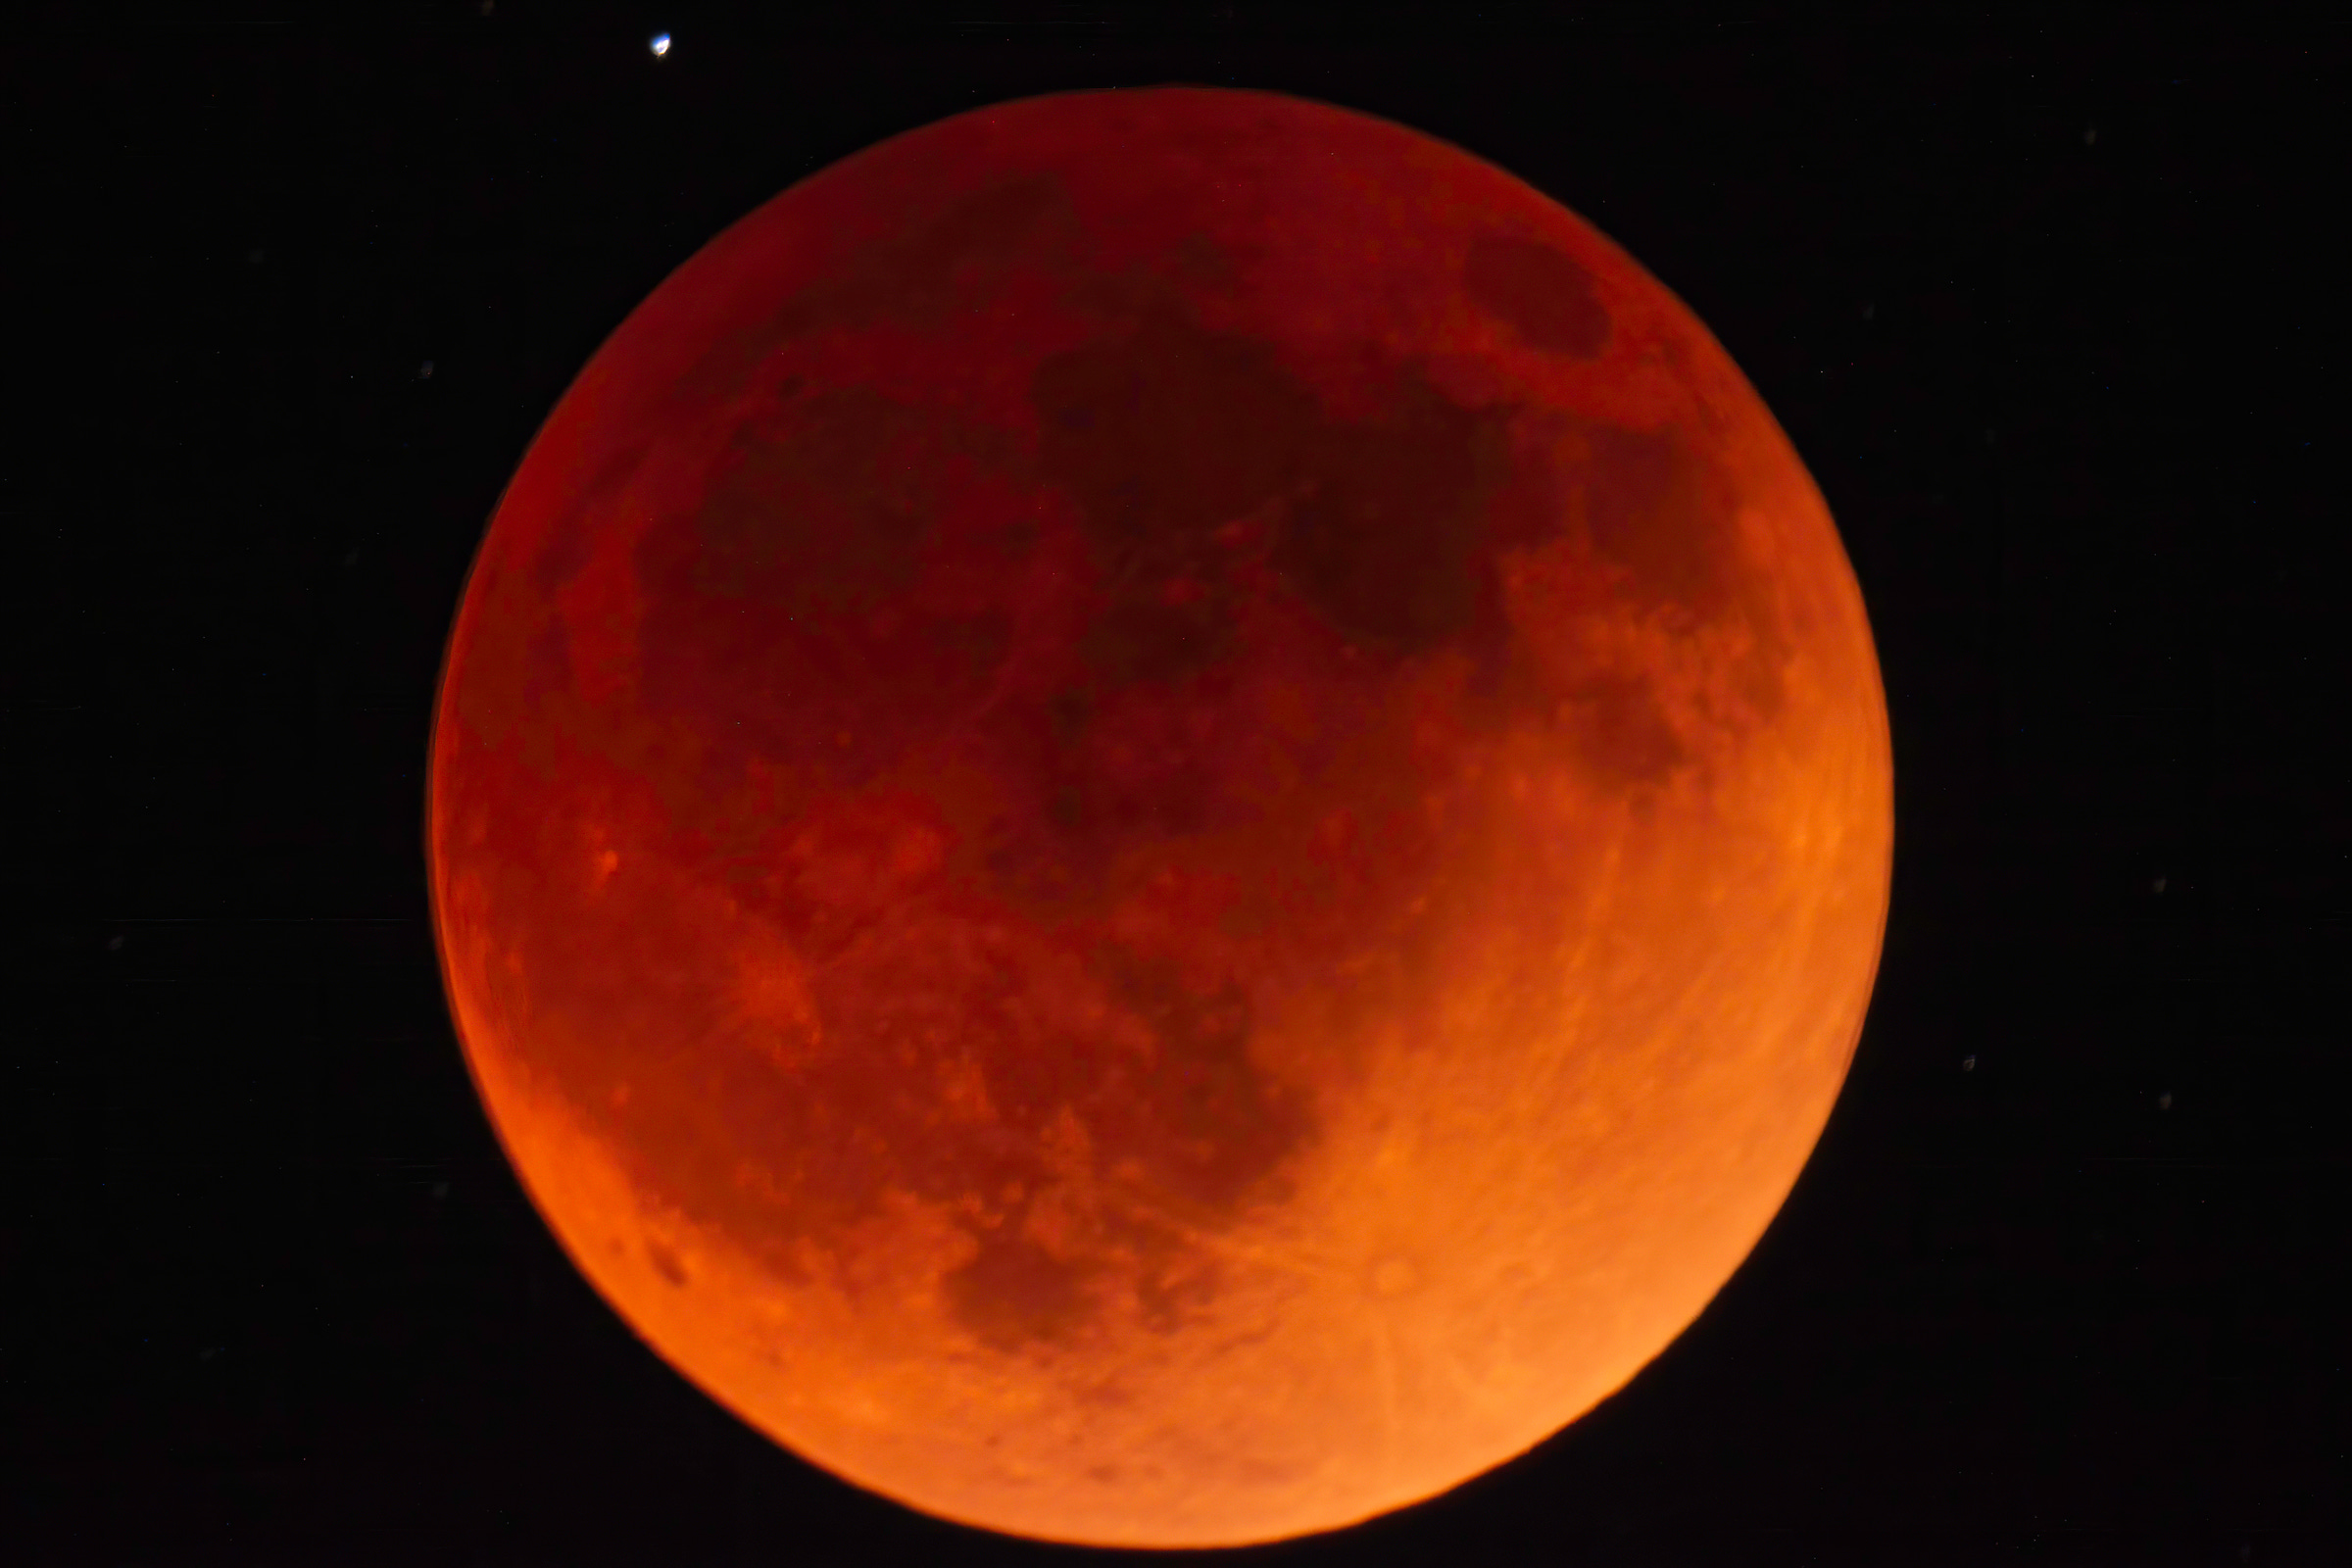 the total lunar eclipse showing the moon and its surface in shades of red against a black sky and a single star above the moon toward the left